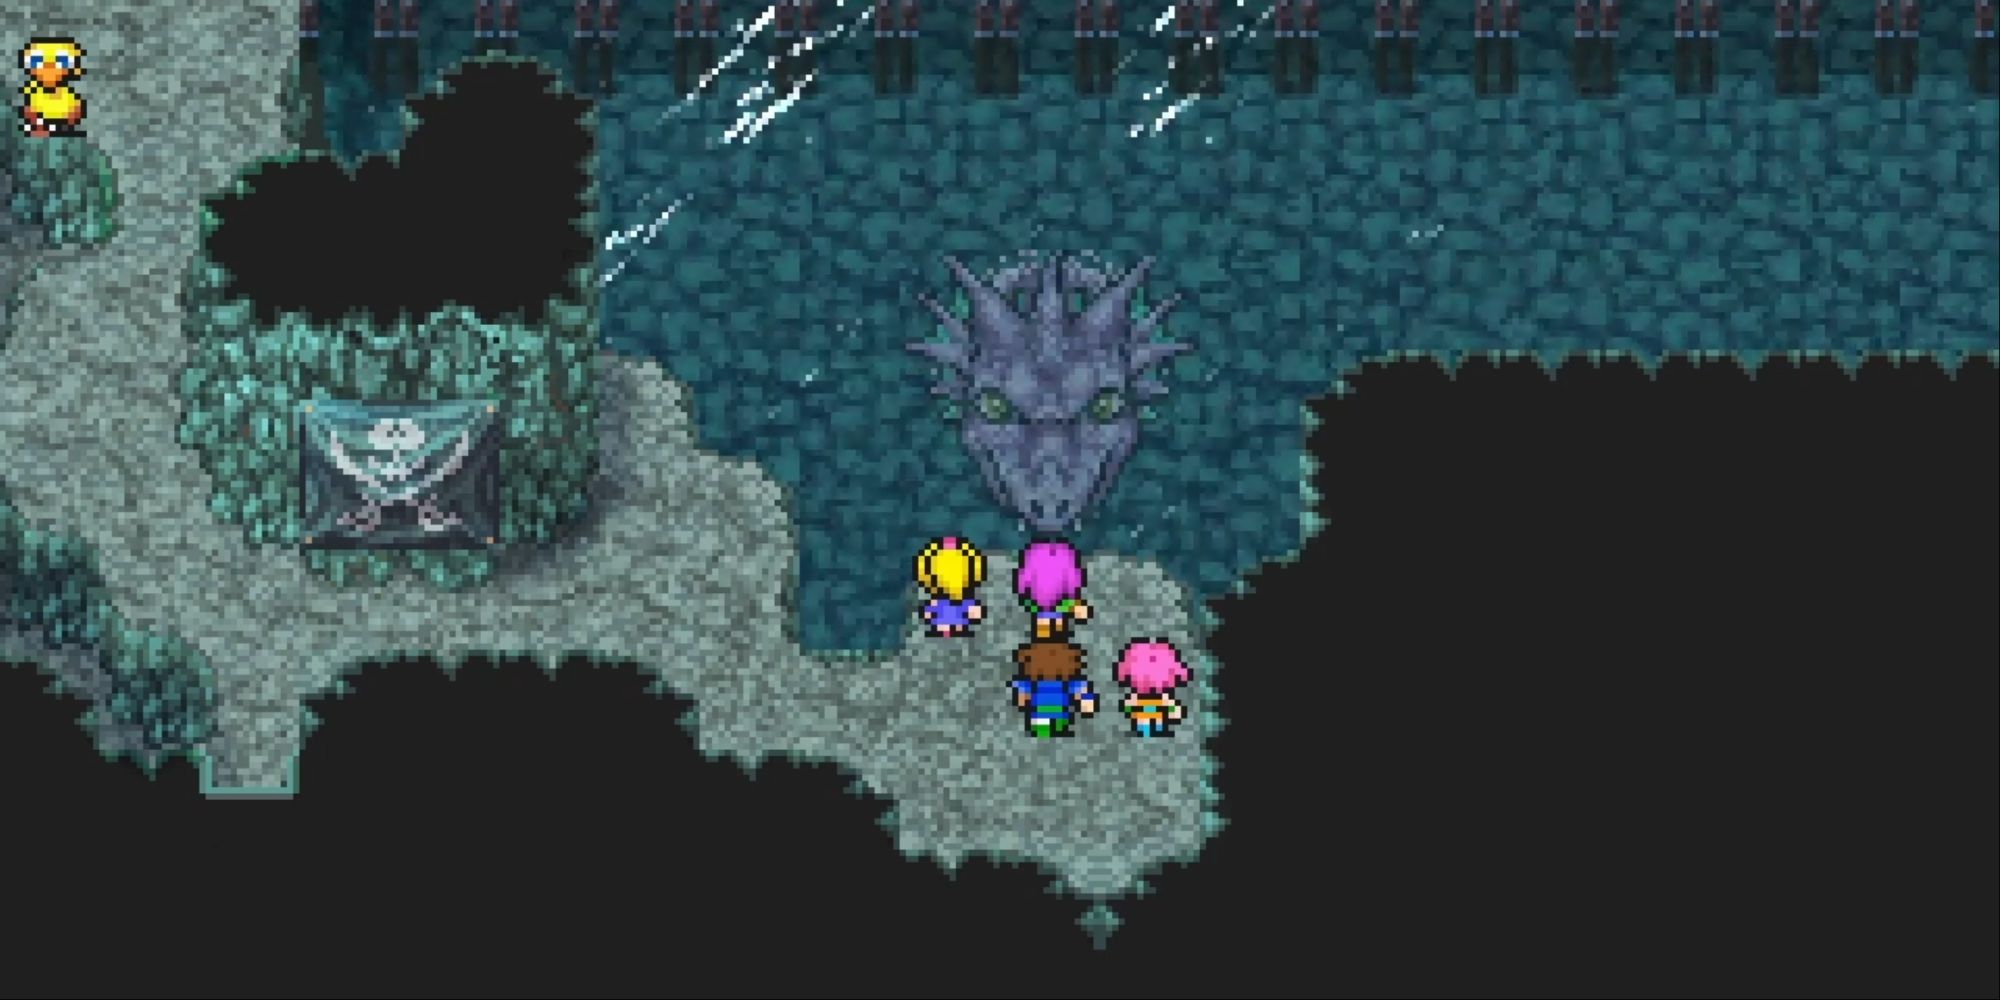 Final Fantasy 5 Pixel Remaster - Meeting Syldra again in the Pirates' Cave